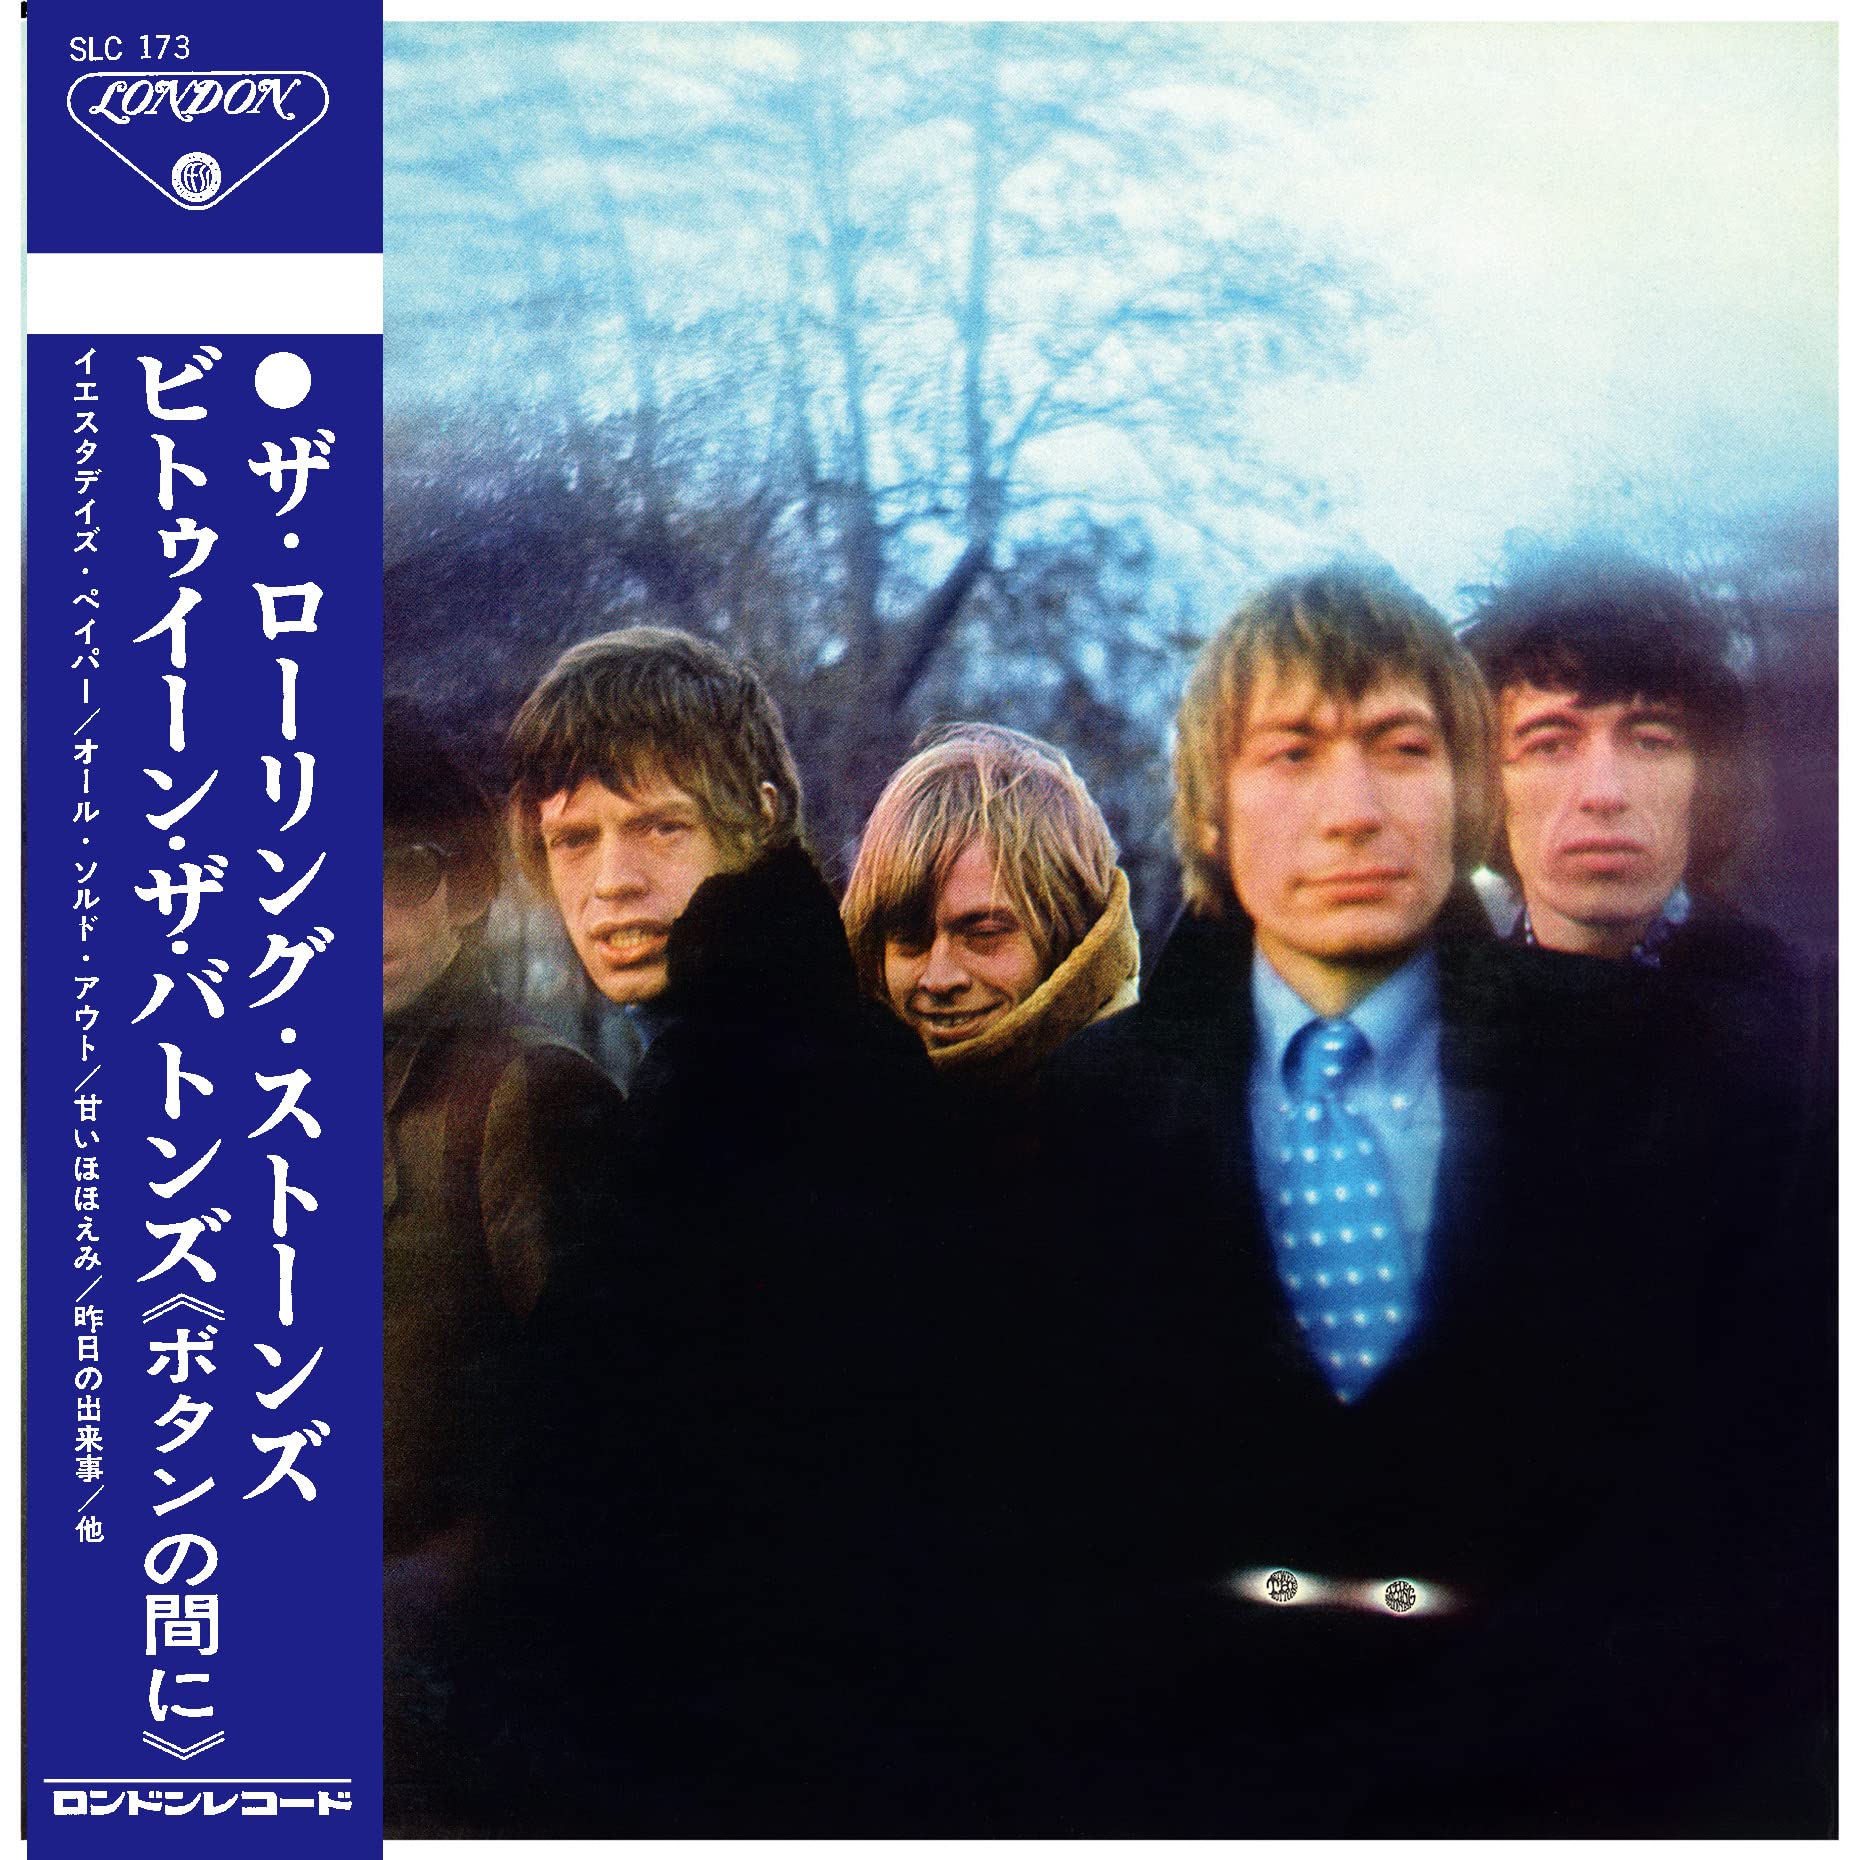 Between The Buttons – Mono SHM